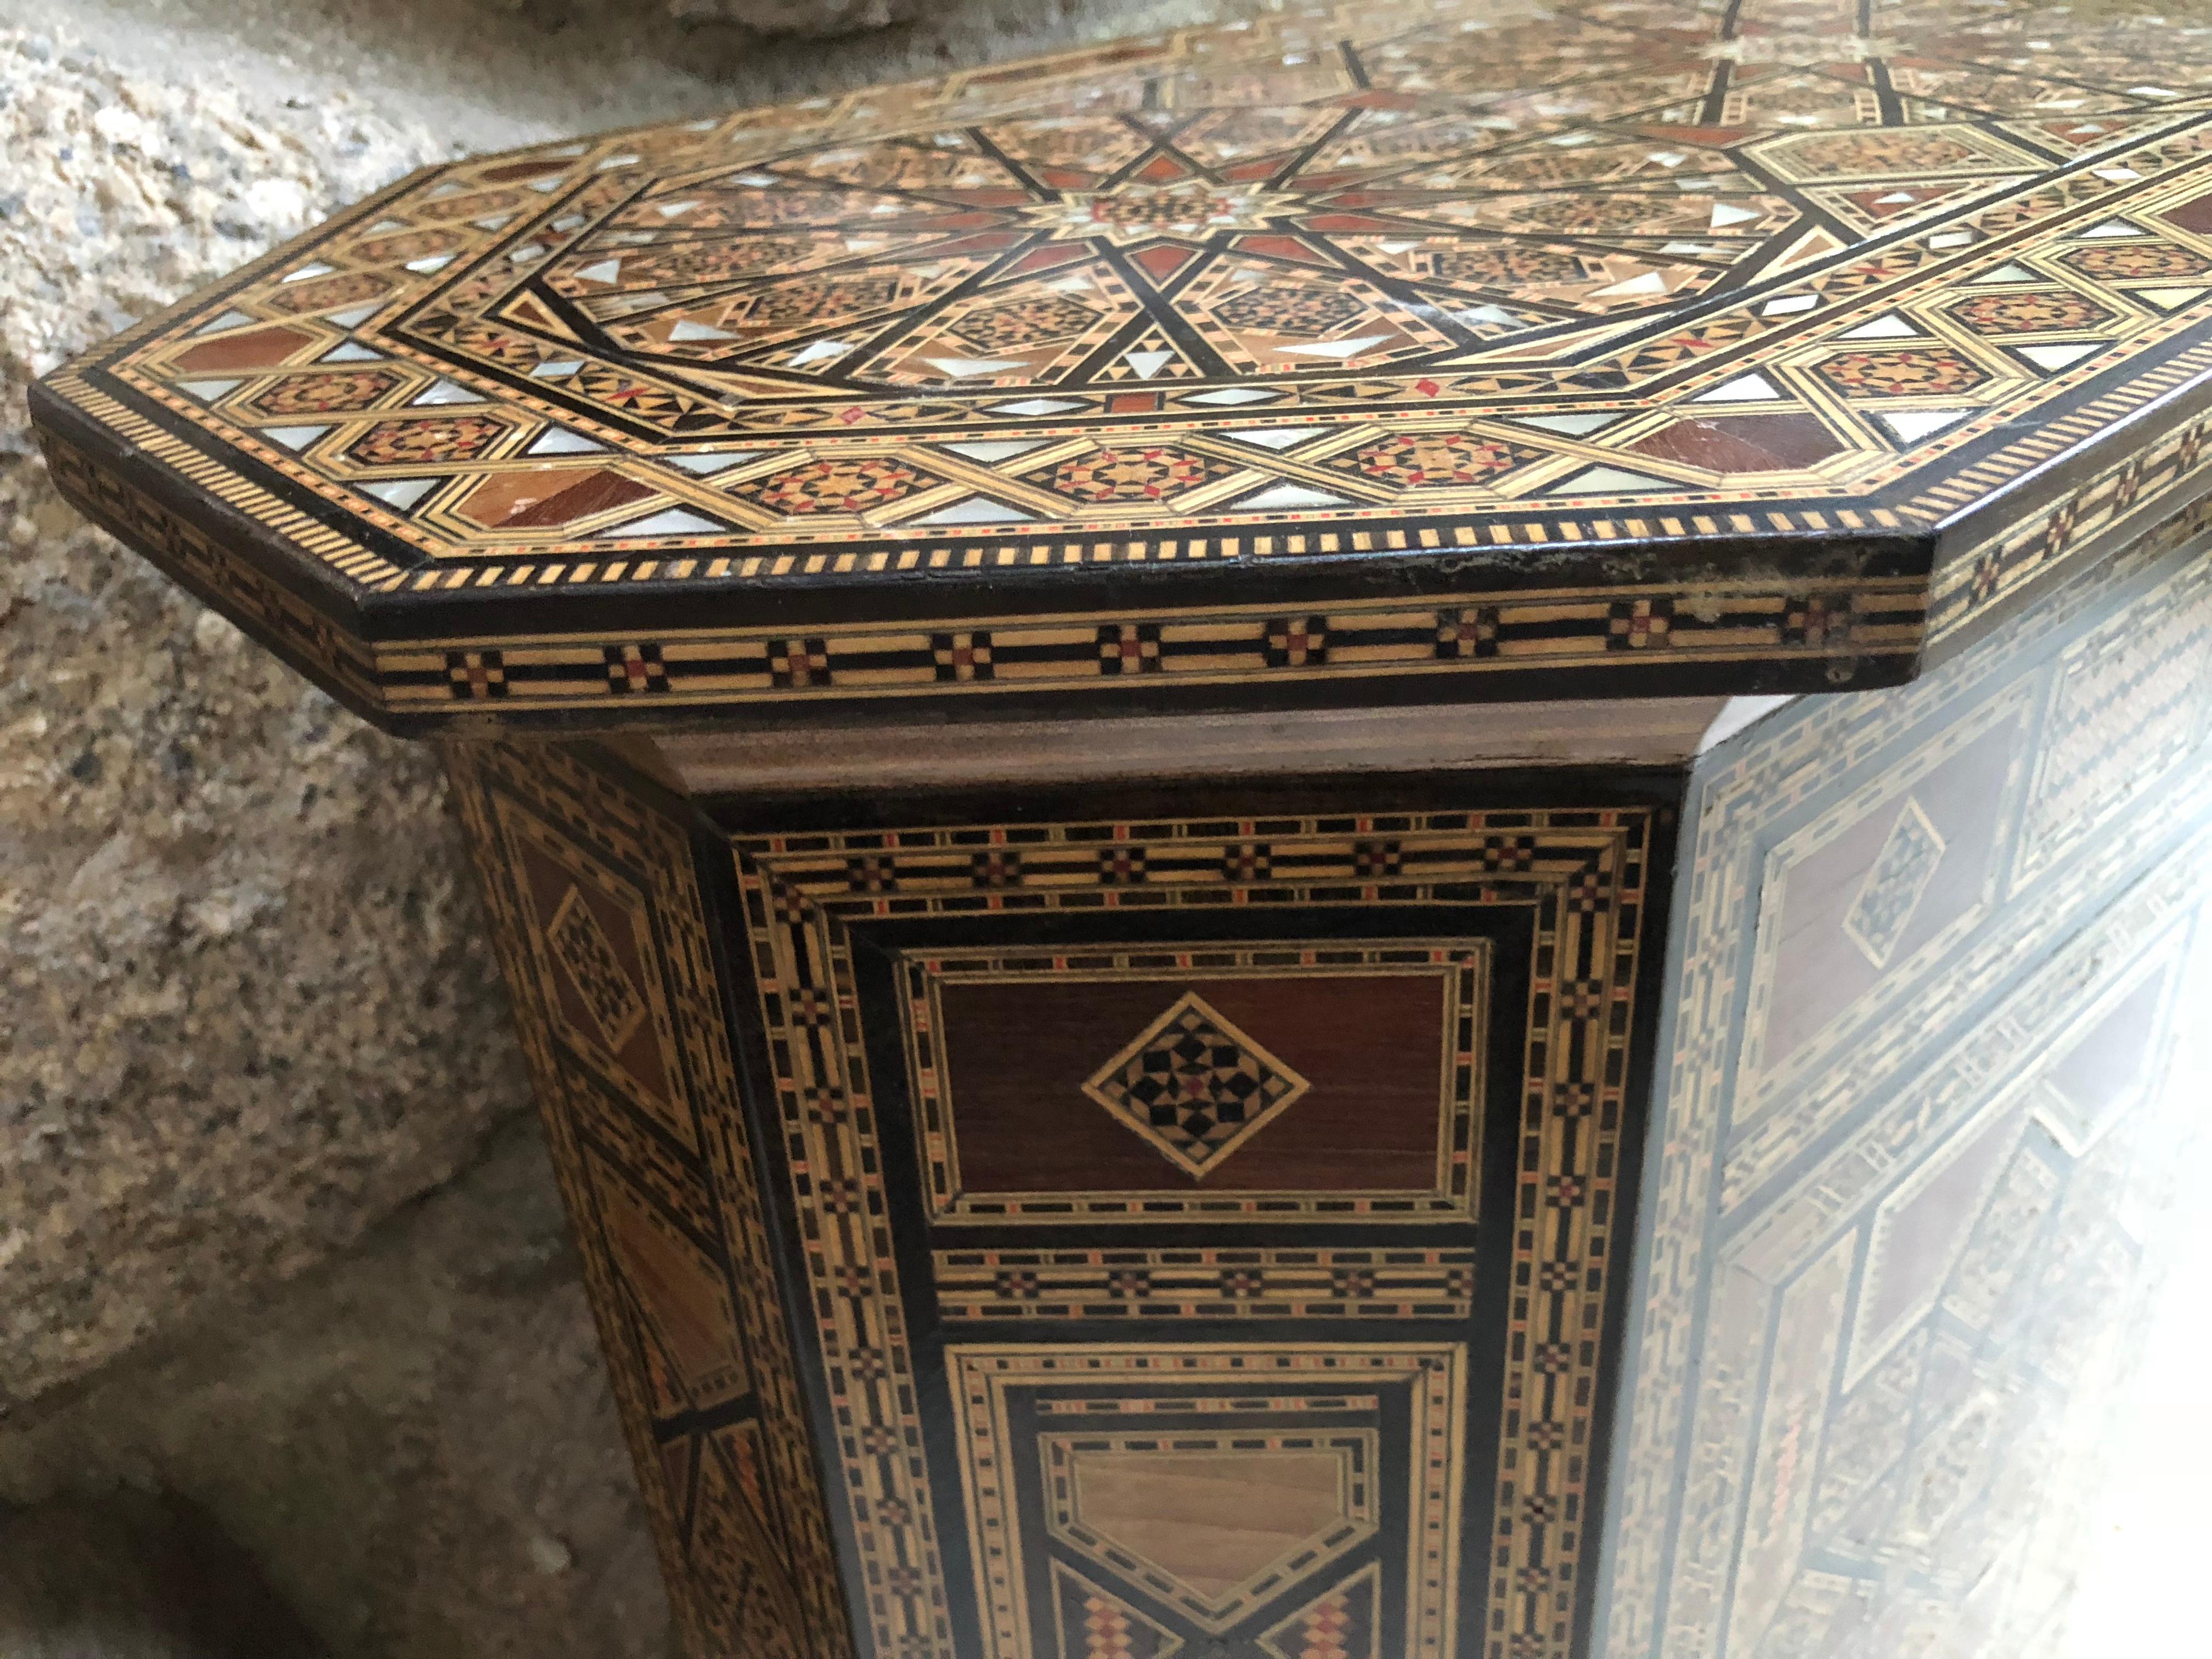 Striking hand made Moroccan side table with door that reveals storage inside. Comprised of inlaid teak wood and mother-of-pearl, table is remarkably detailed and is in excellent condition.